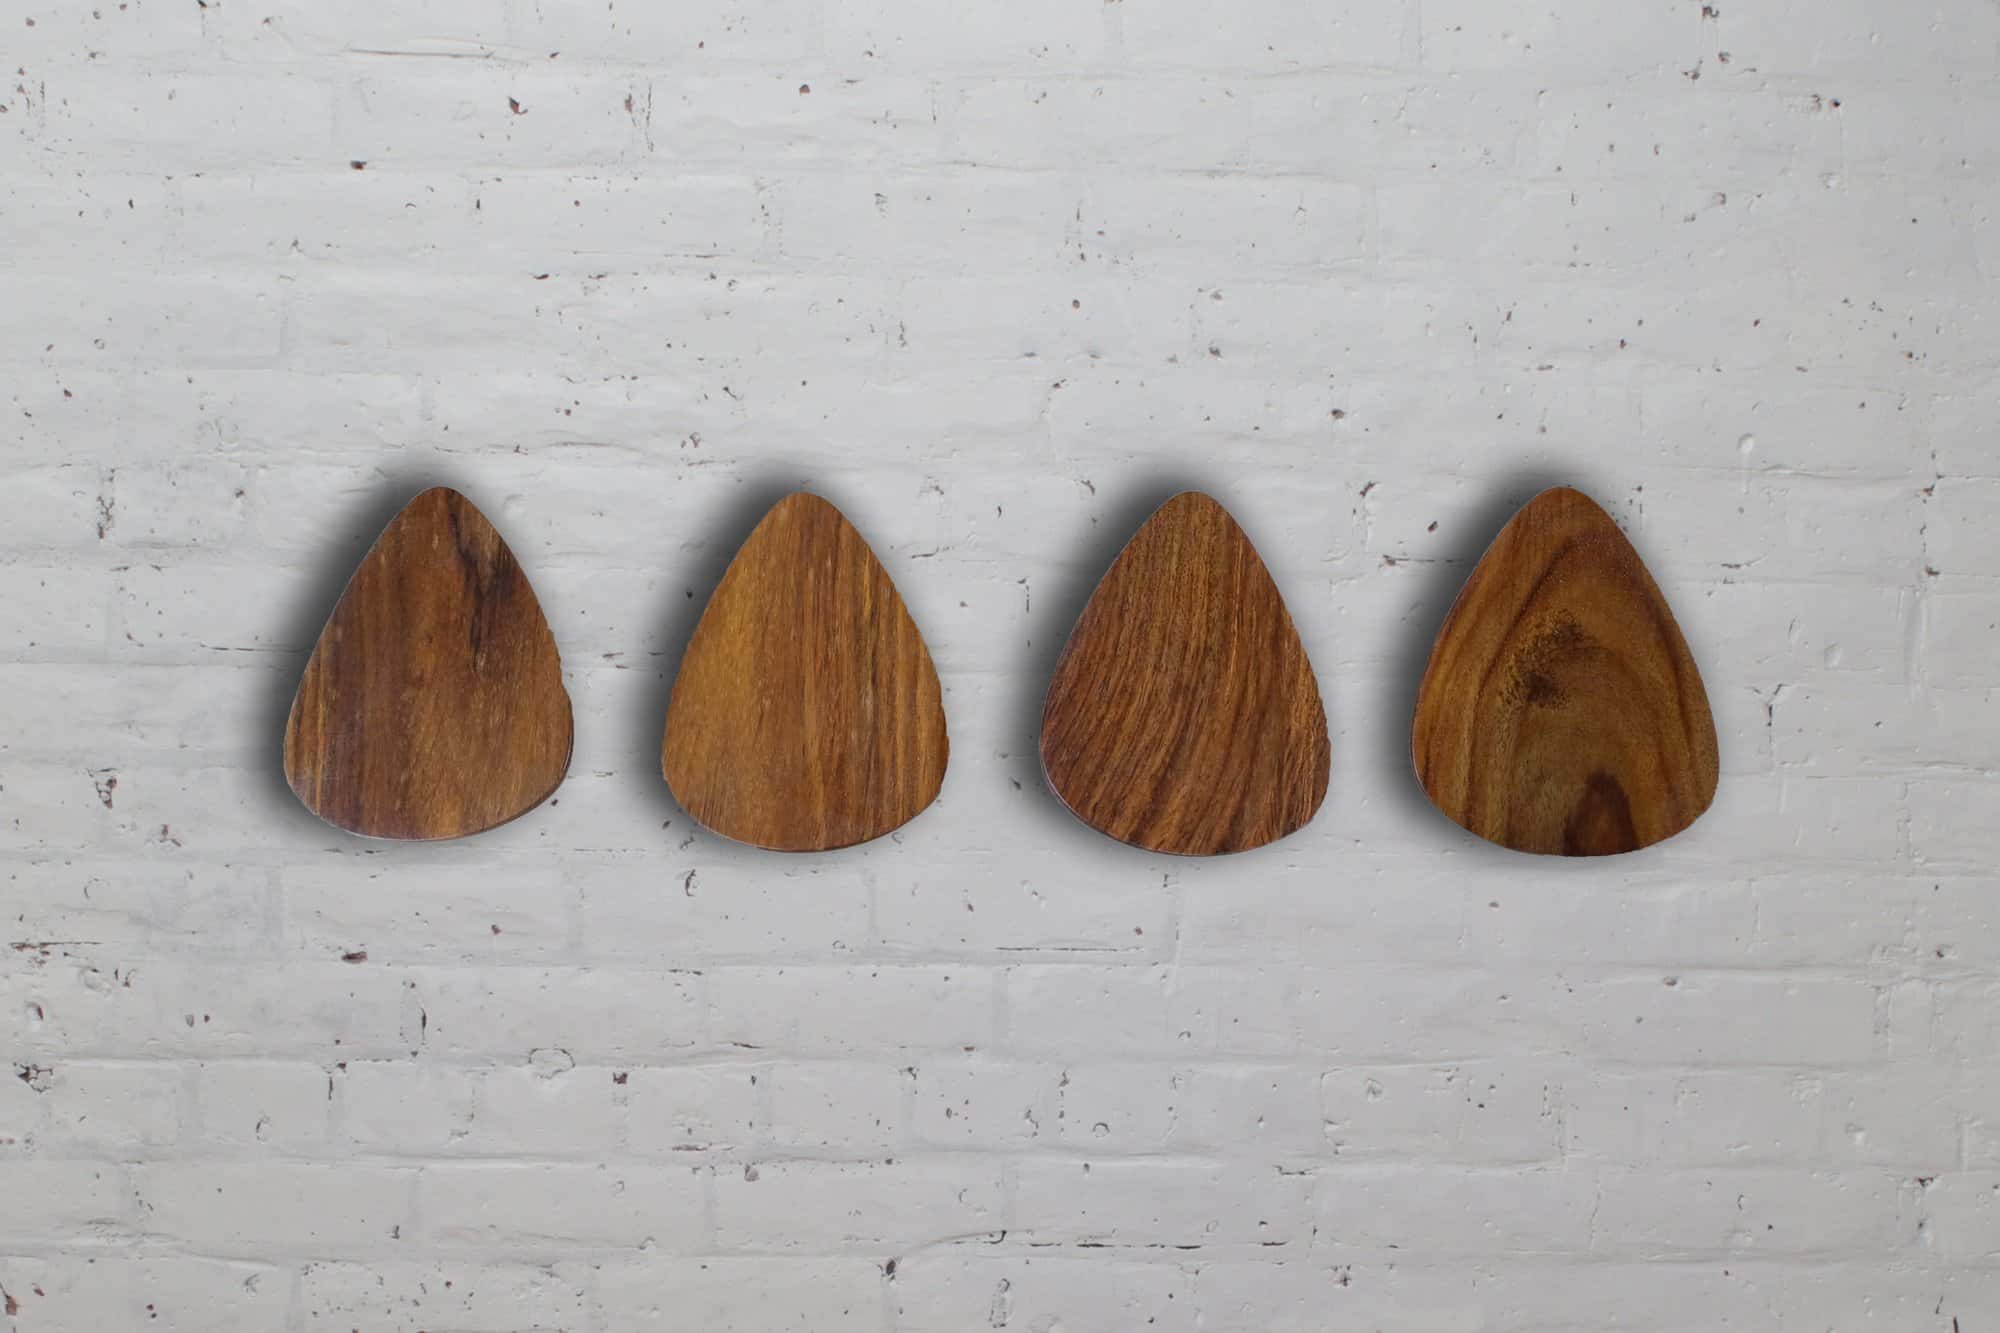 Jimi Hanger Knob - Teak Wood/Natural Finish by From the Source